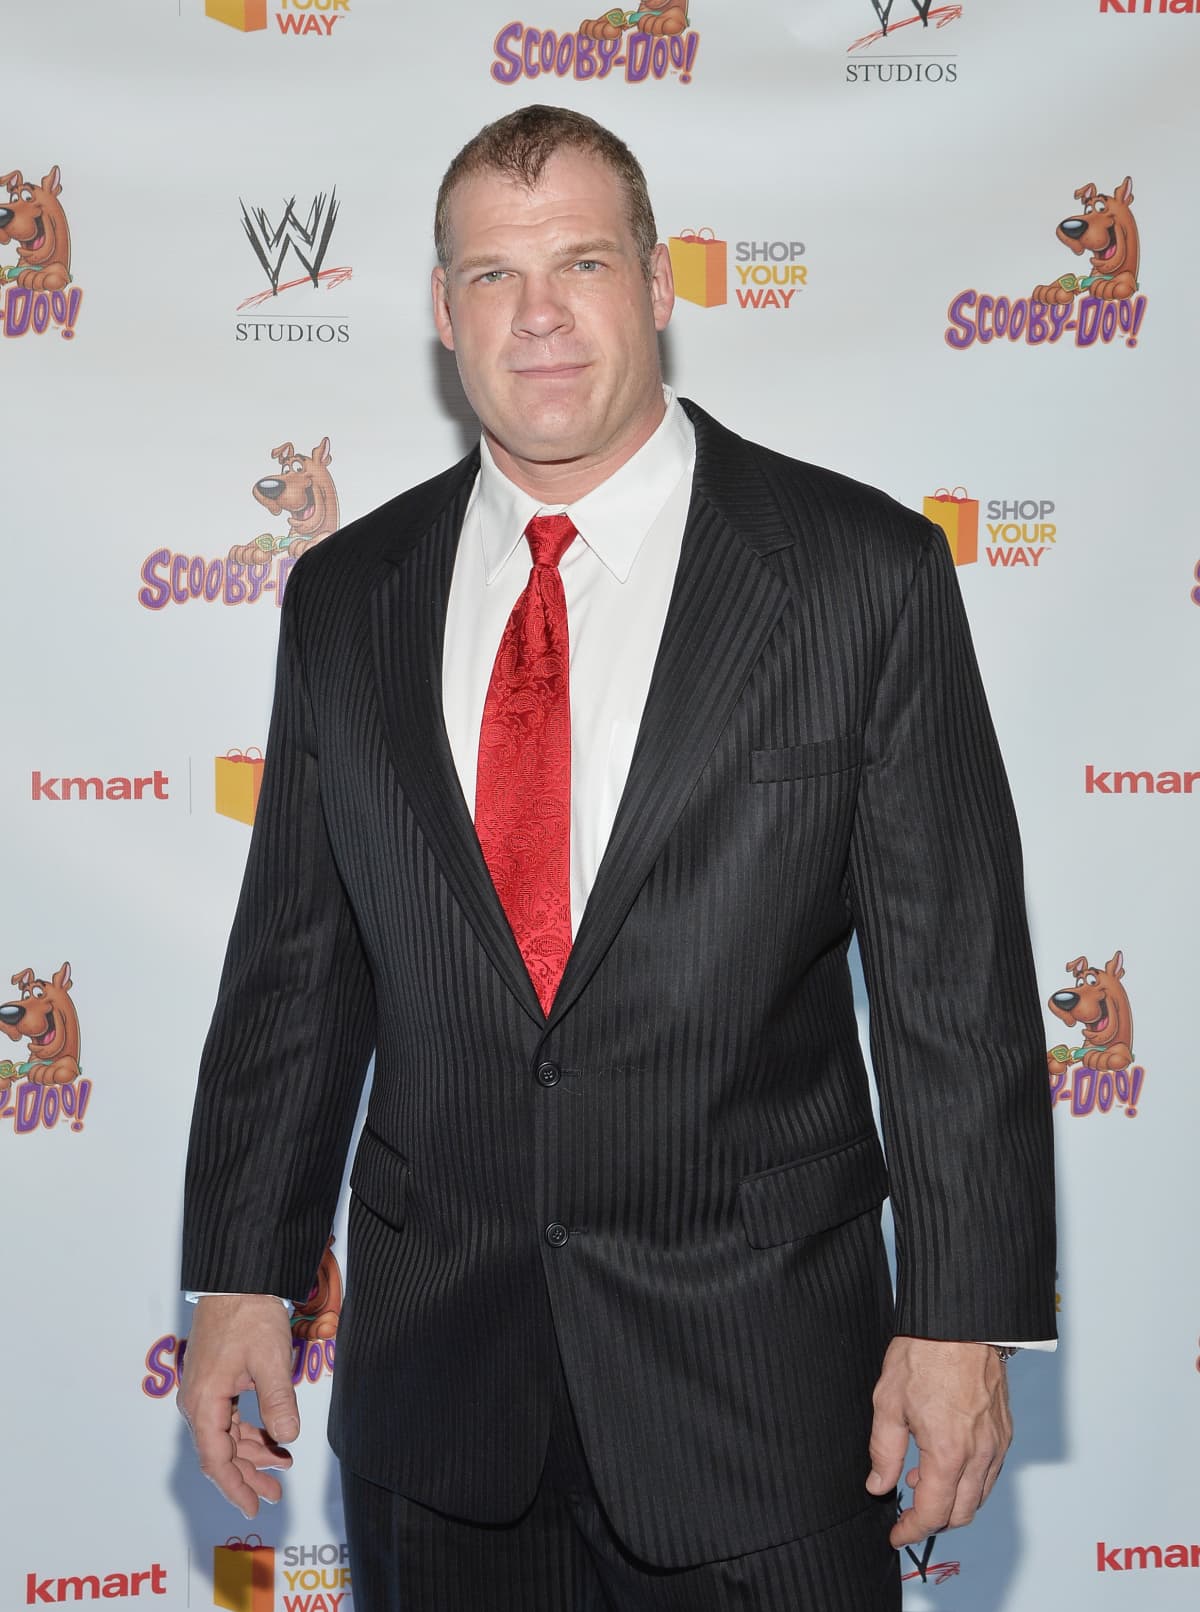 ATLANTA, GA - APRIL 03: Kane attends the 2011 WWE Hall Of Fame Induction Ceremony at the Philips Arena on April 3, 2011 in Atlanta, Georgia. (Photo by Moses Robinson/Getty Images)